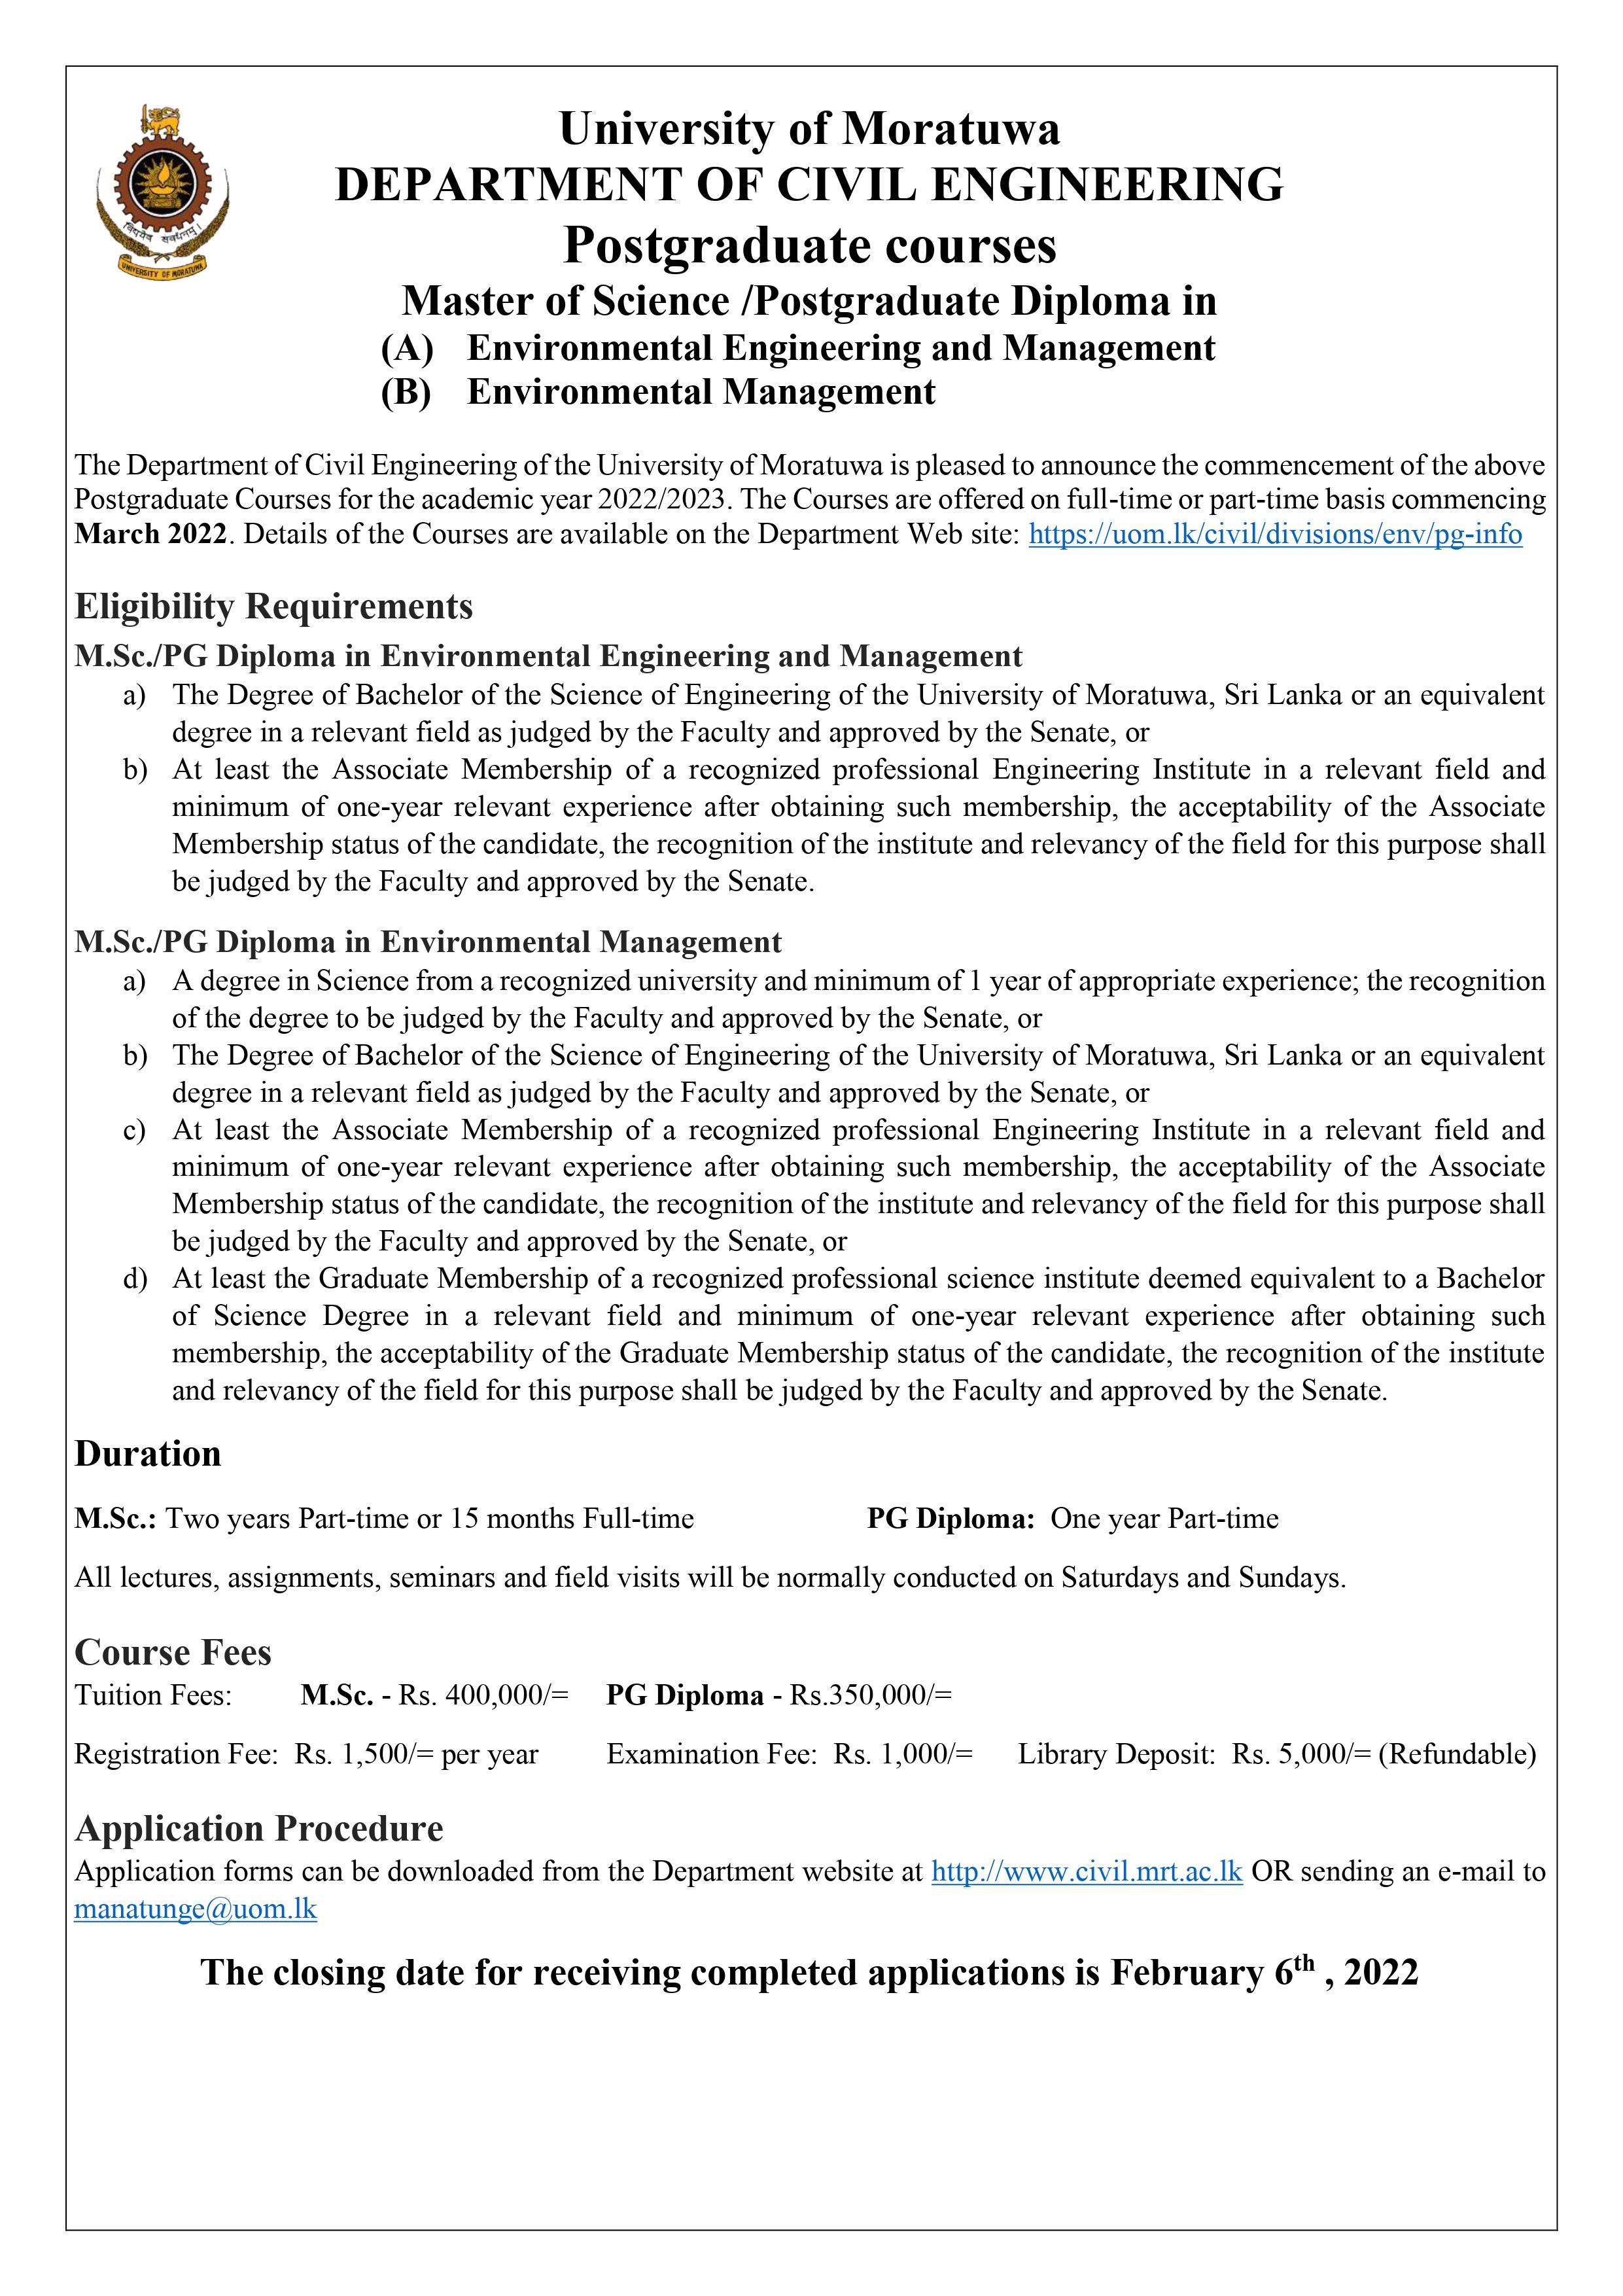 MSc/PG Dip in Environmental Management/Environmental Engineering and Management 2022